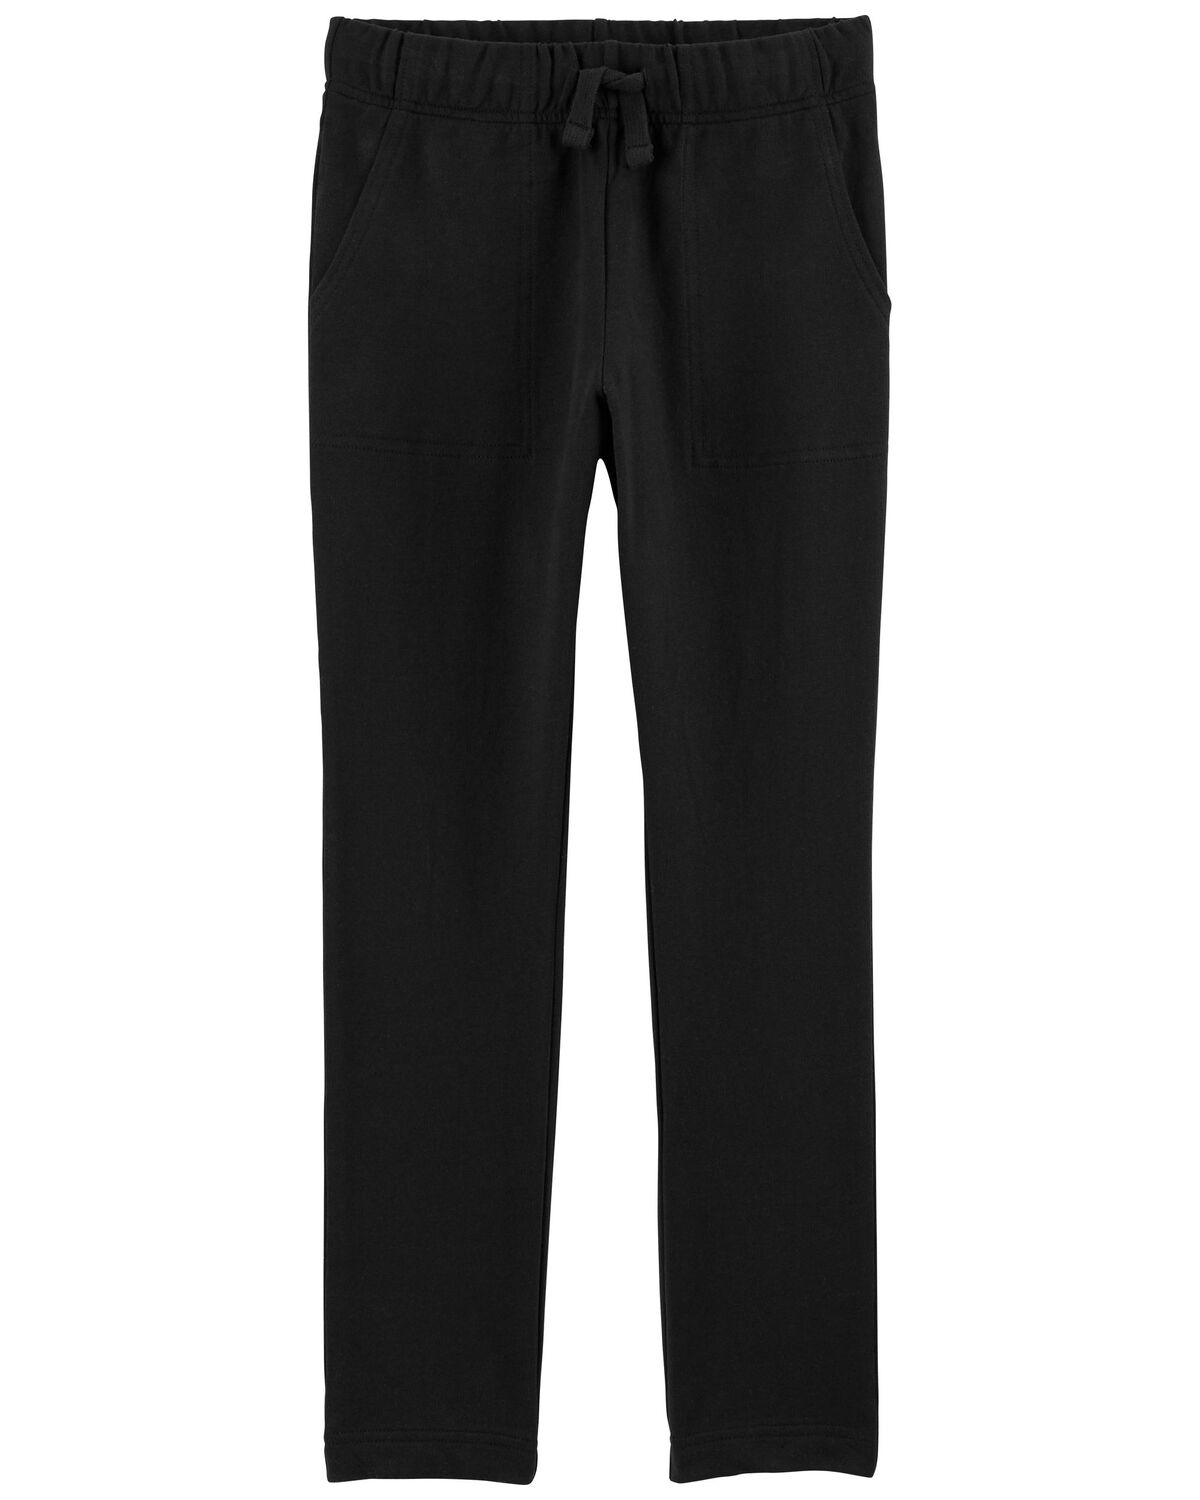 Very Black Kid French Terry Pull-On Pants | carters.com